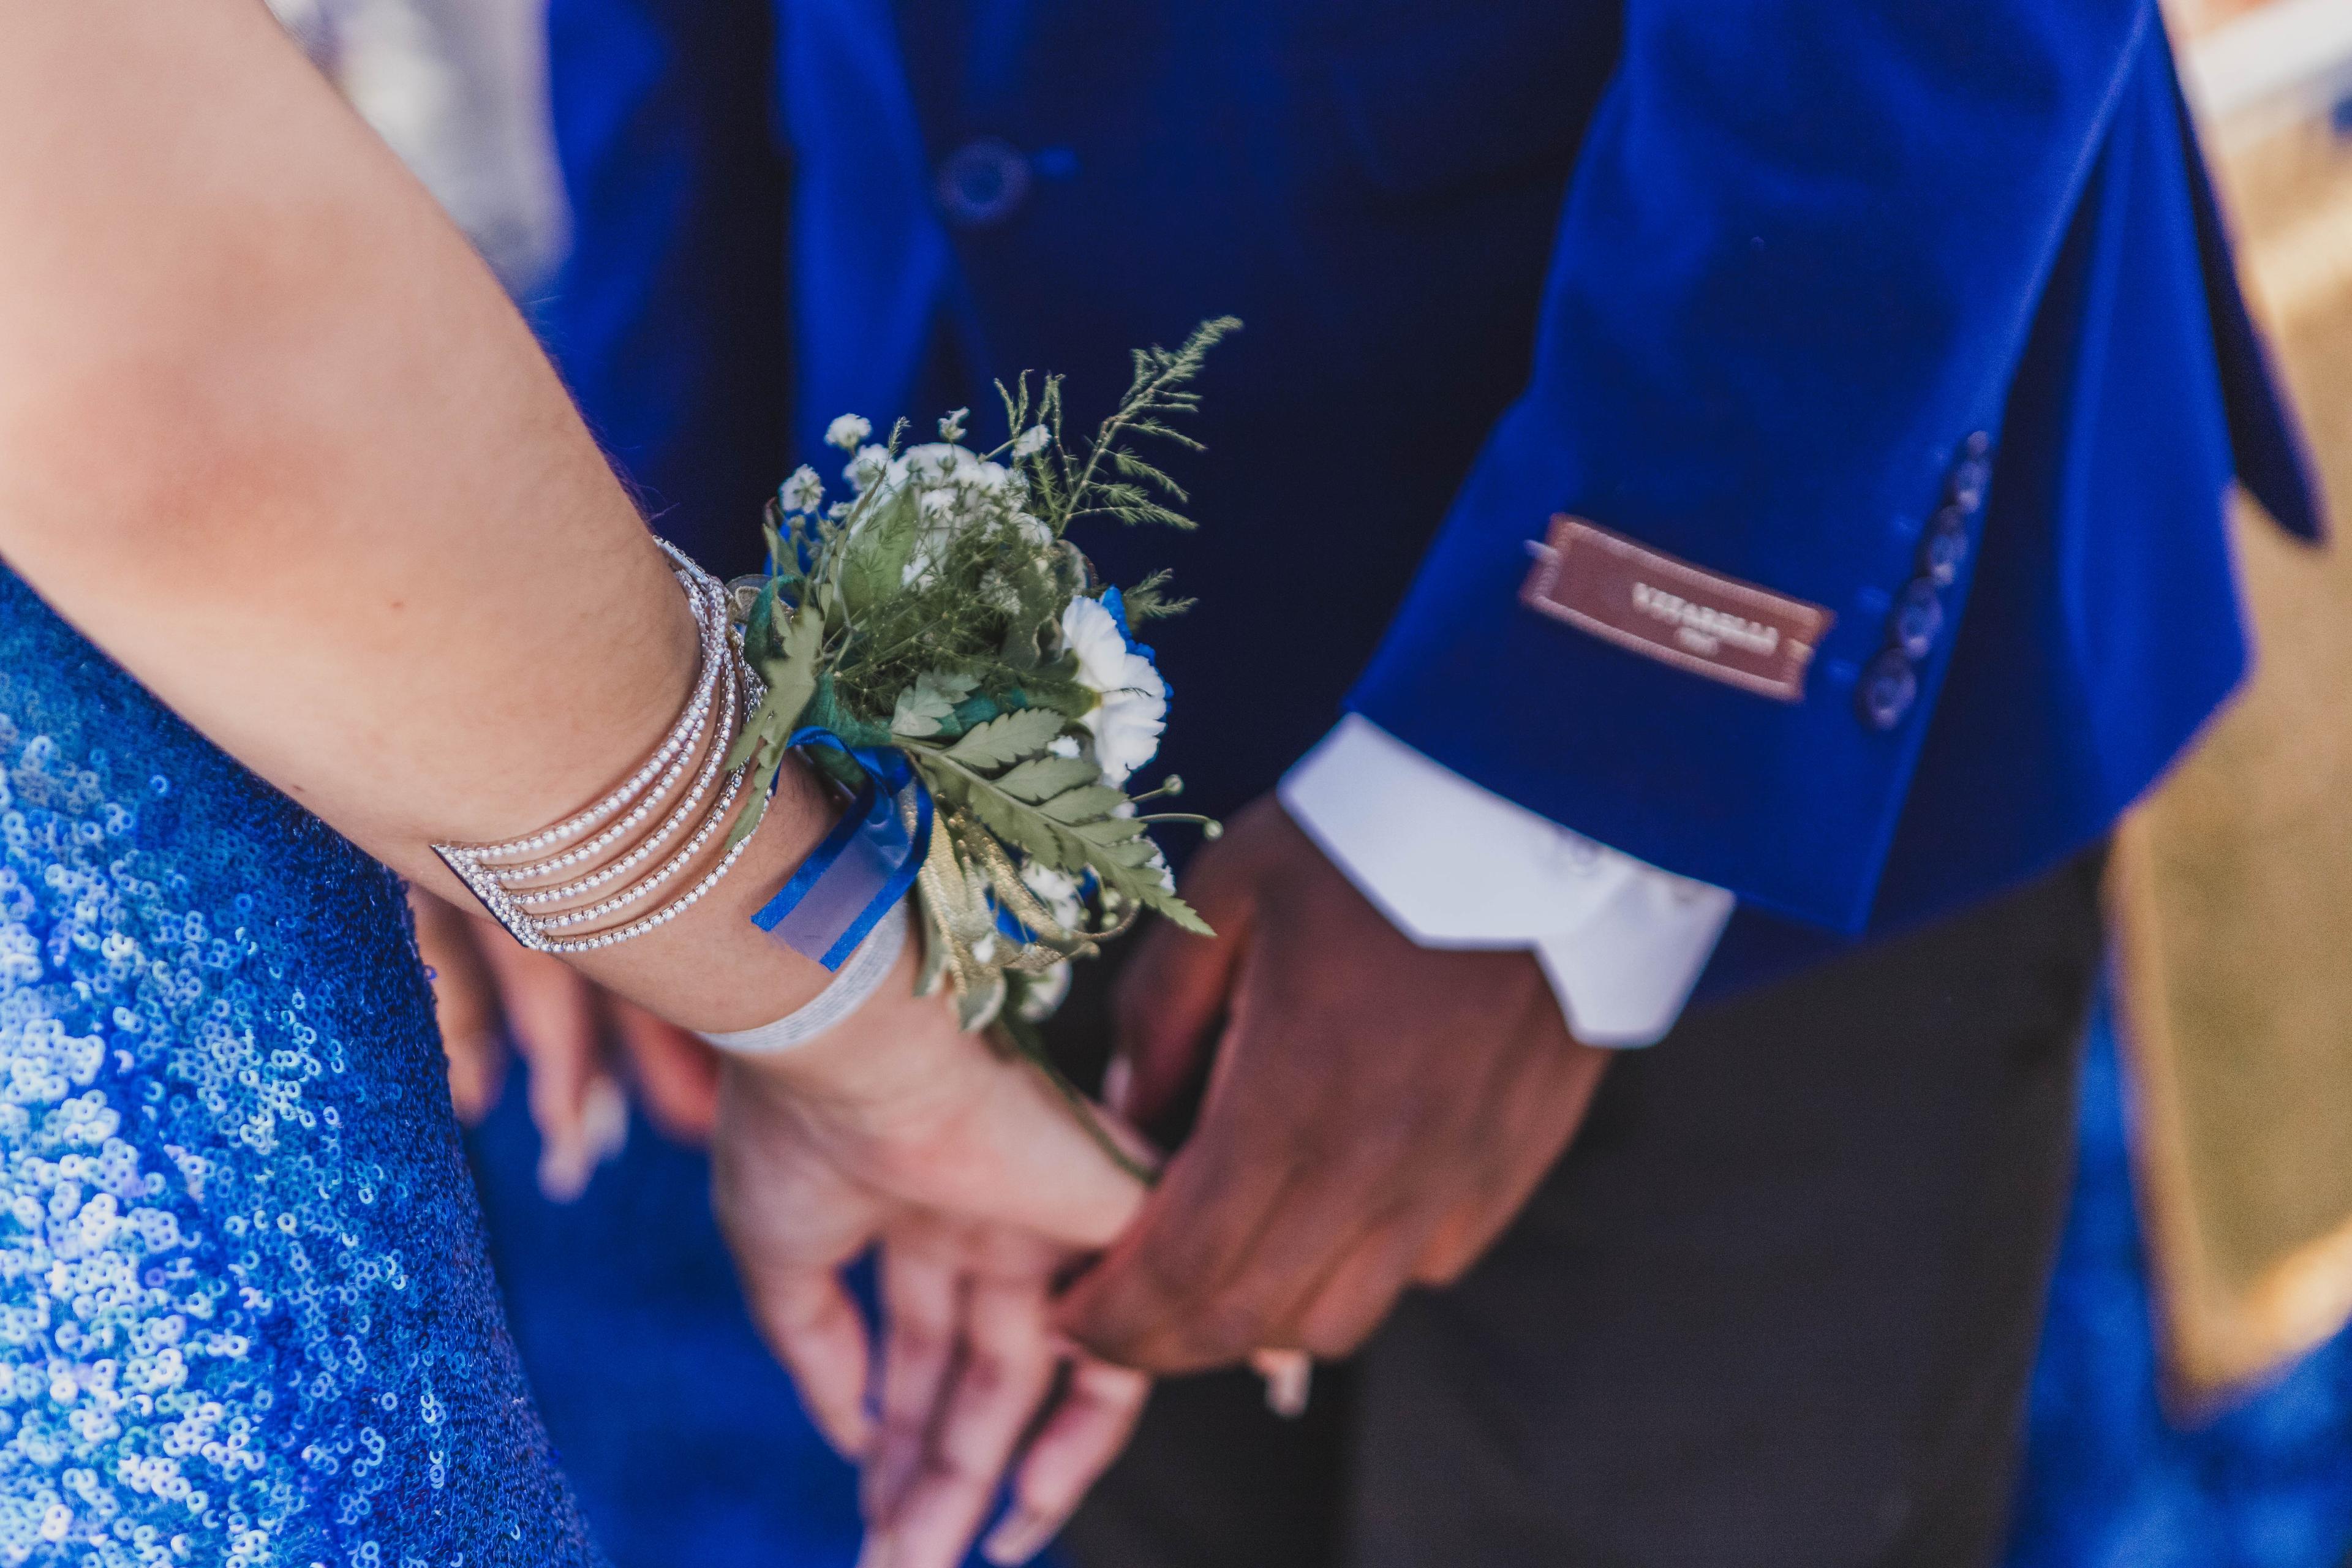 A shot of a man and woman people holding hands, both wearing blue and dressed up for prom